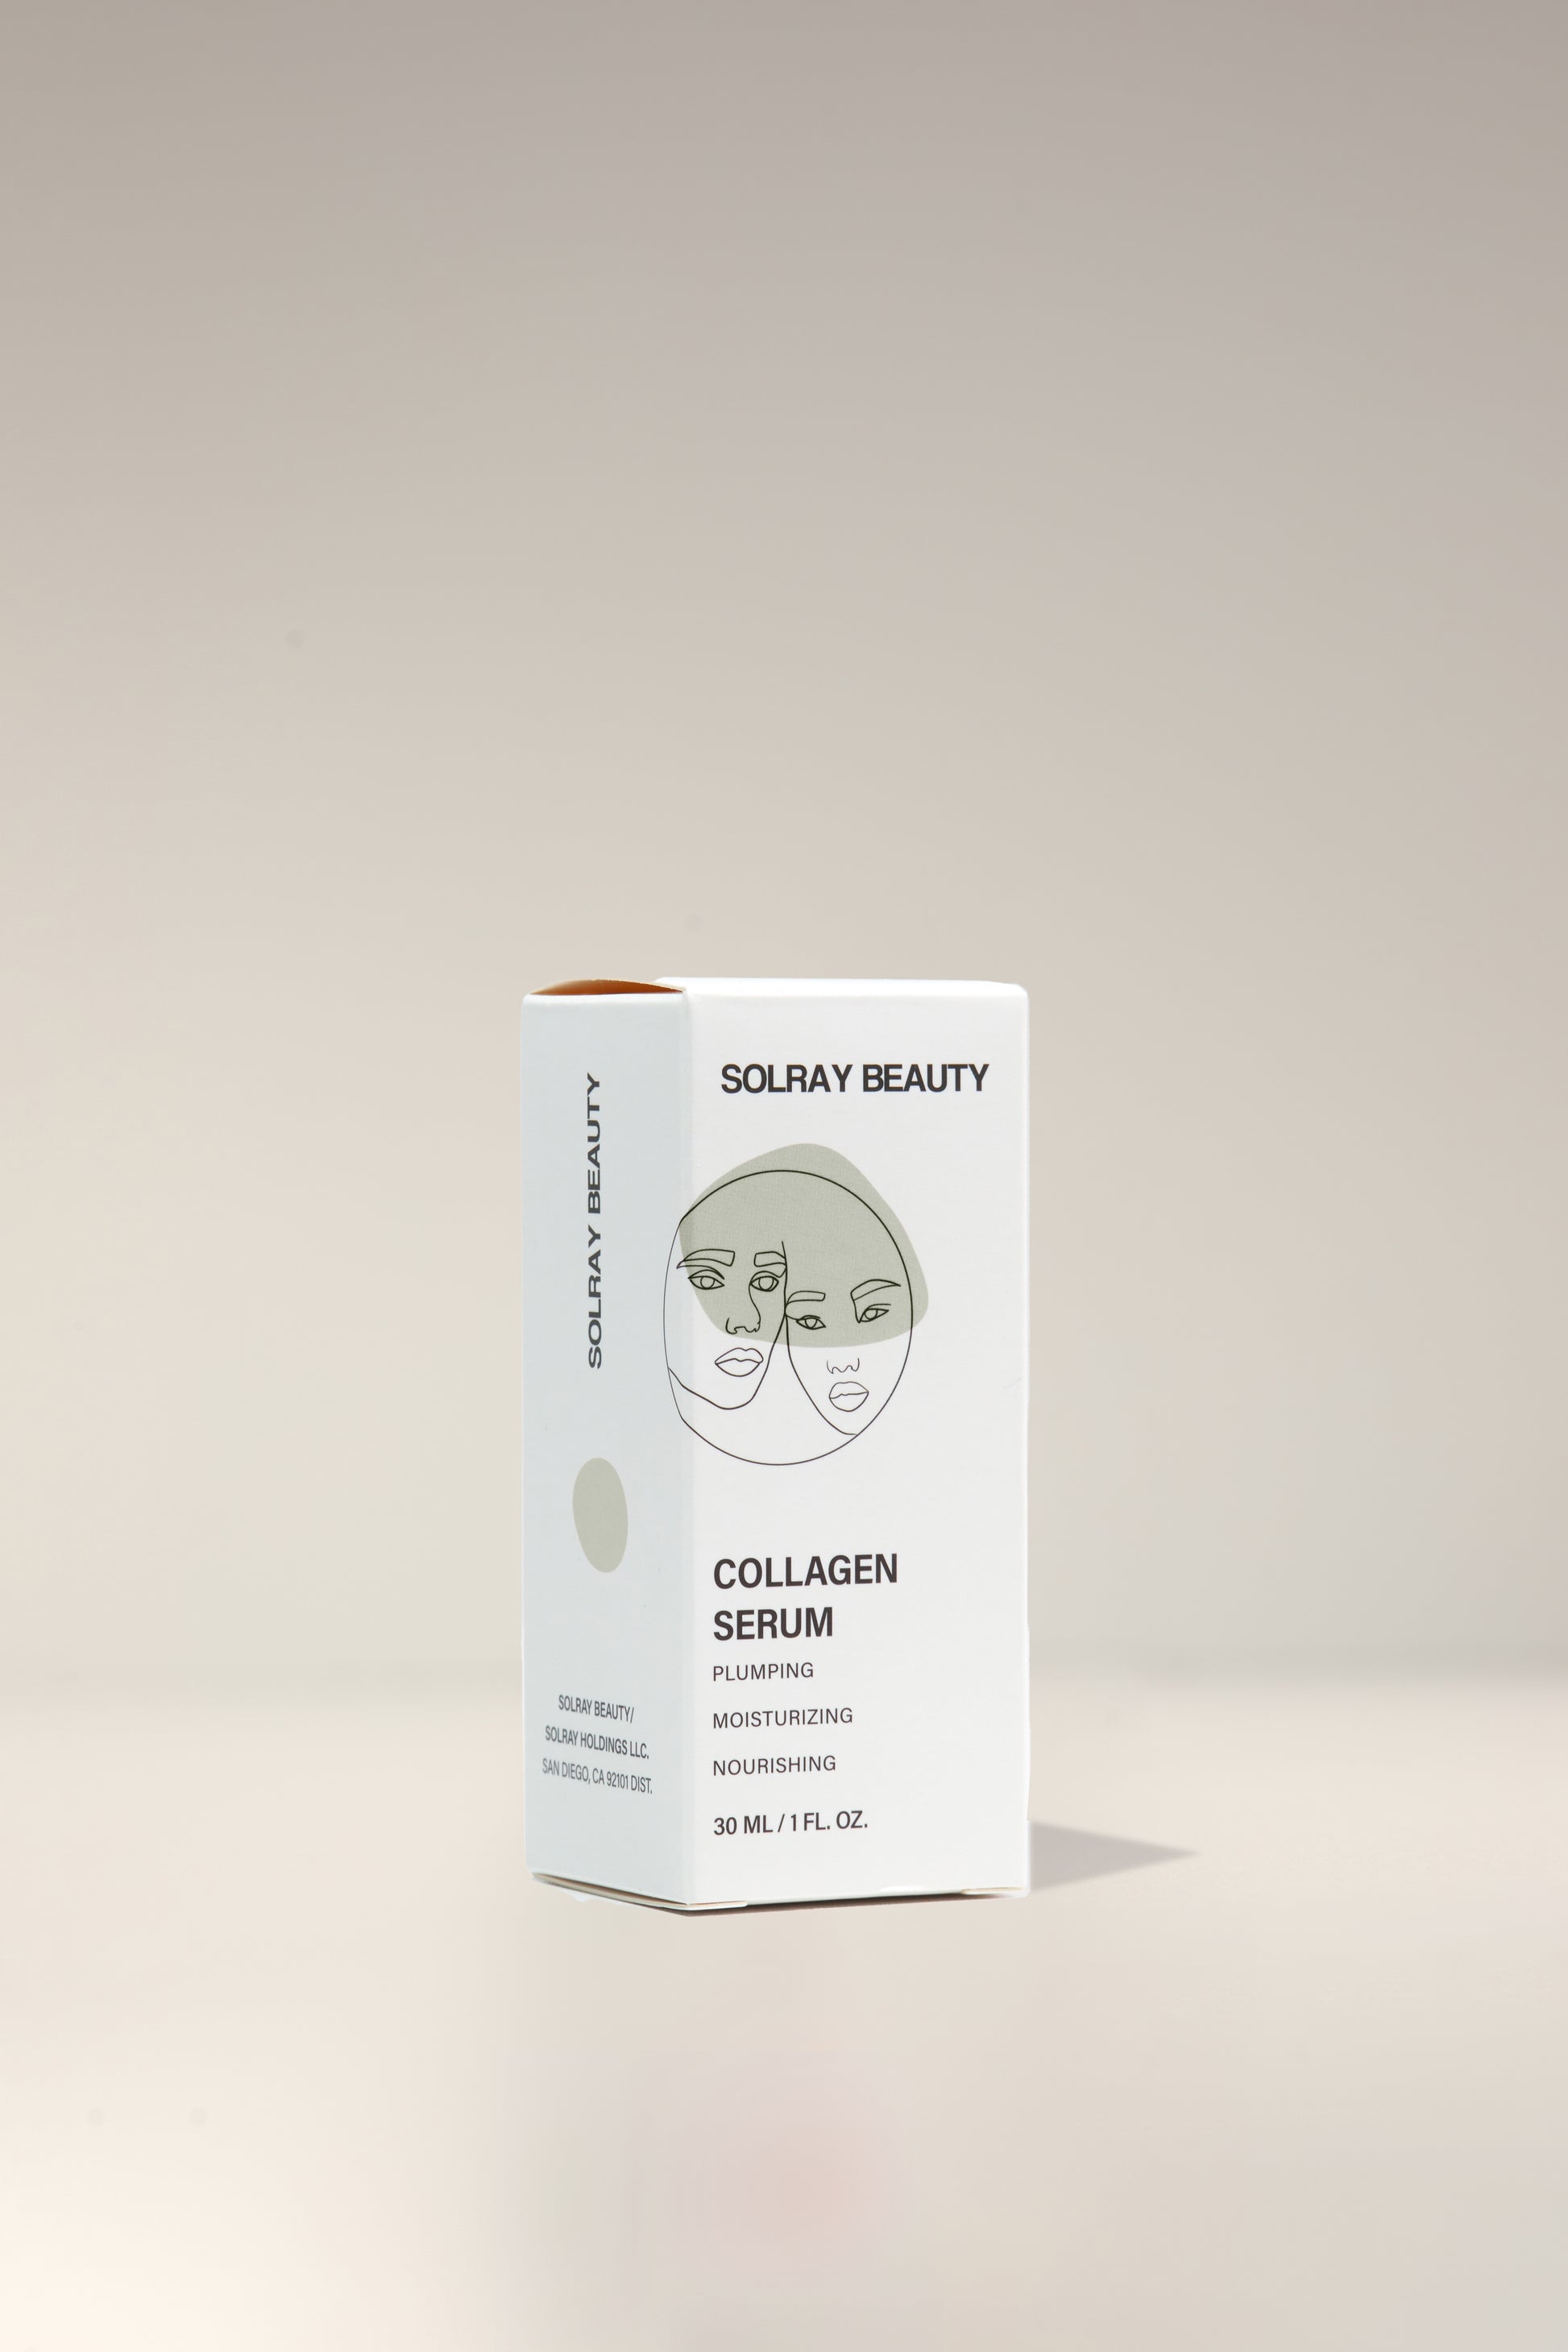 The box for SolRay Beauty's Collagen Serum, featuring the product name and key ingredients on the label.